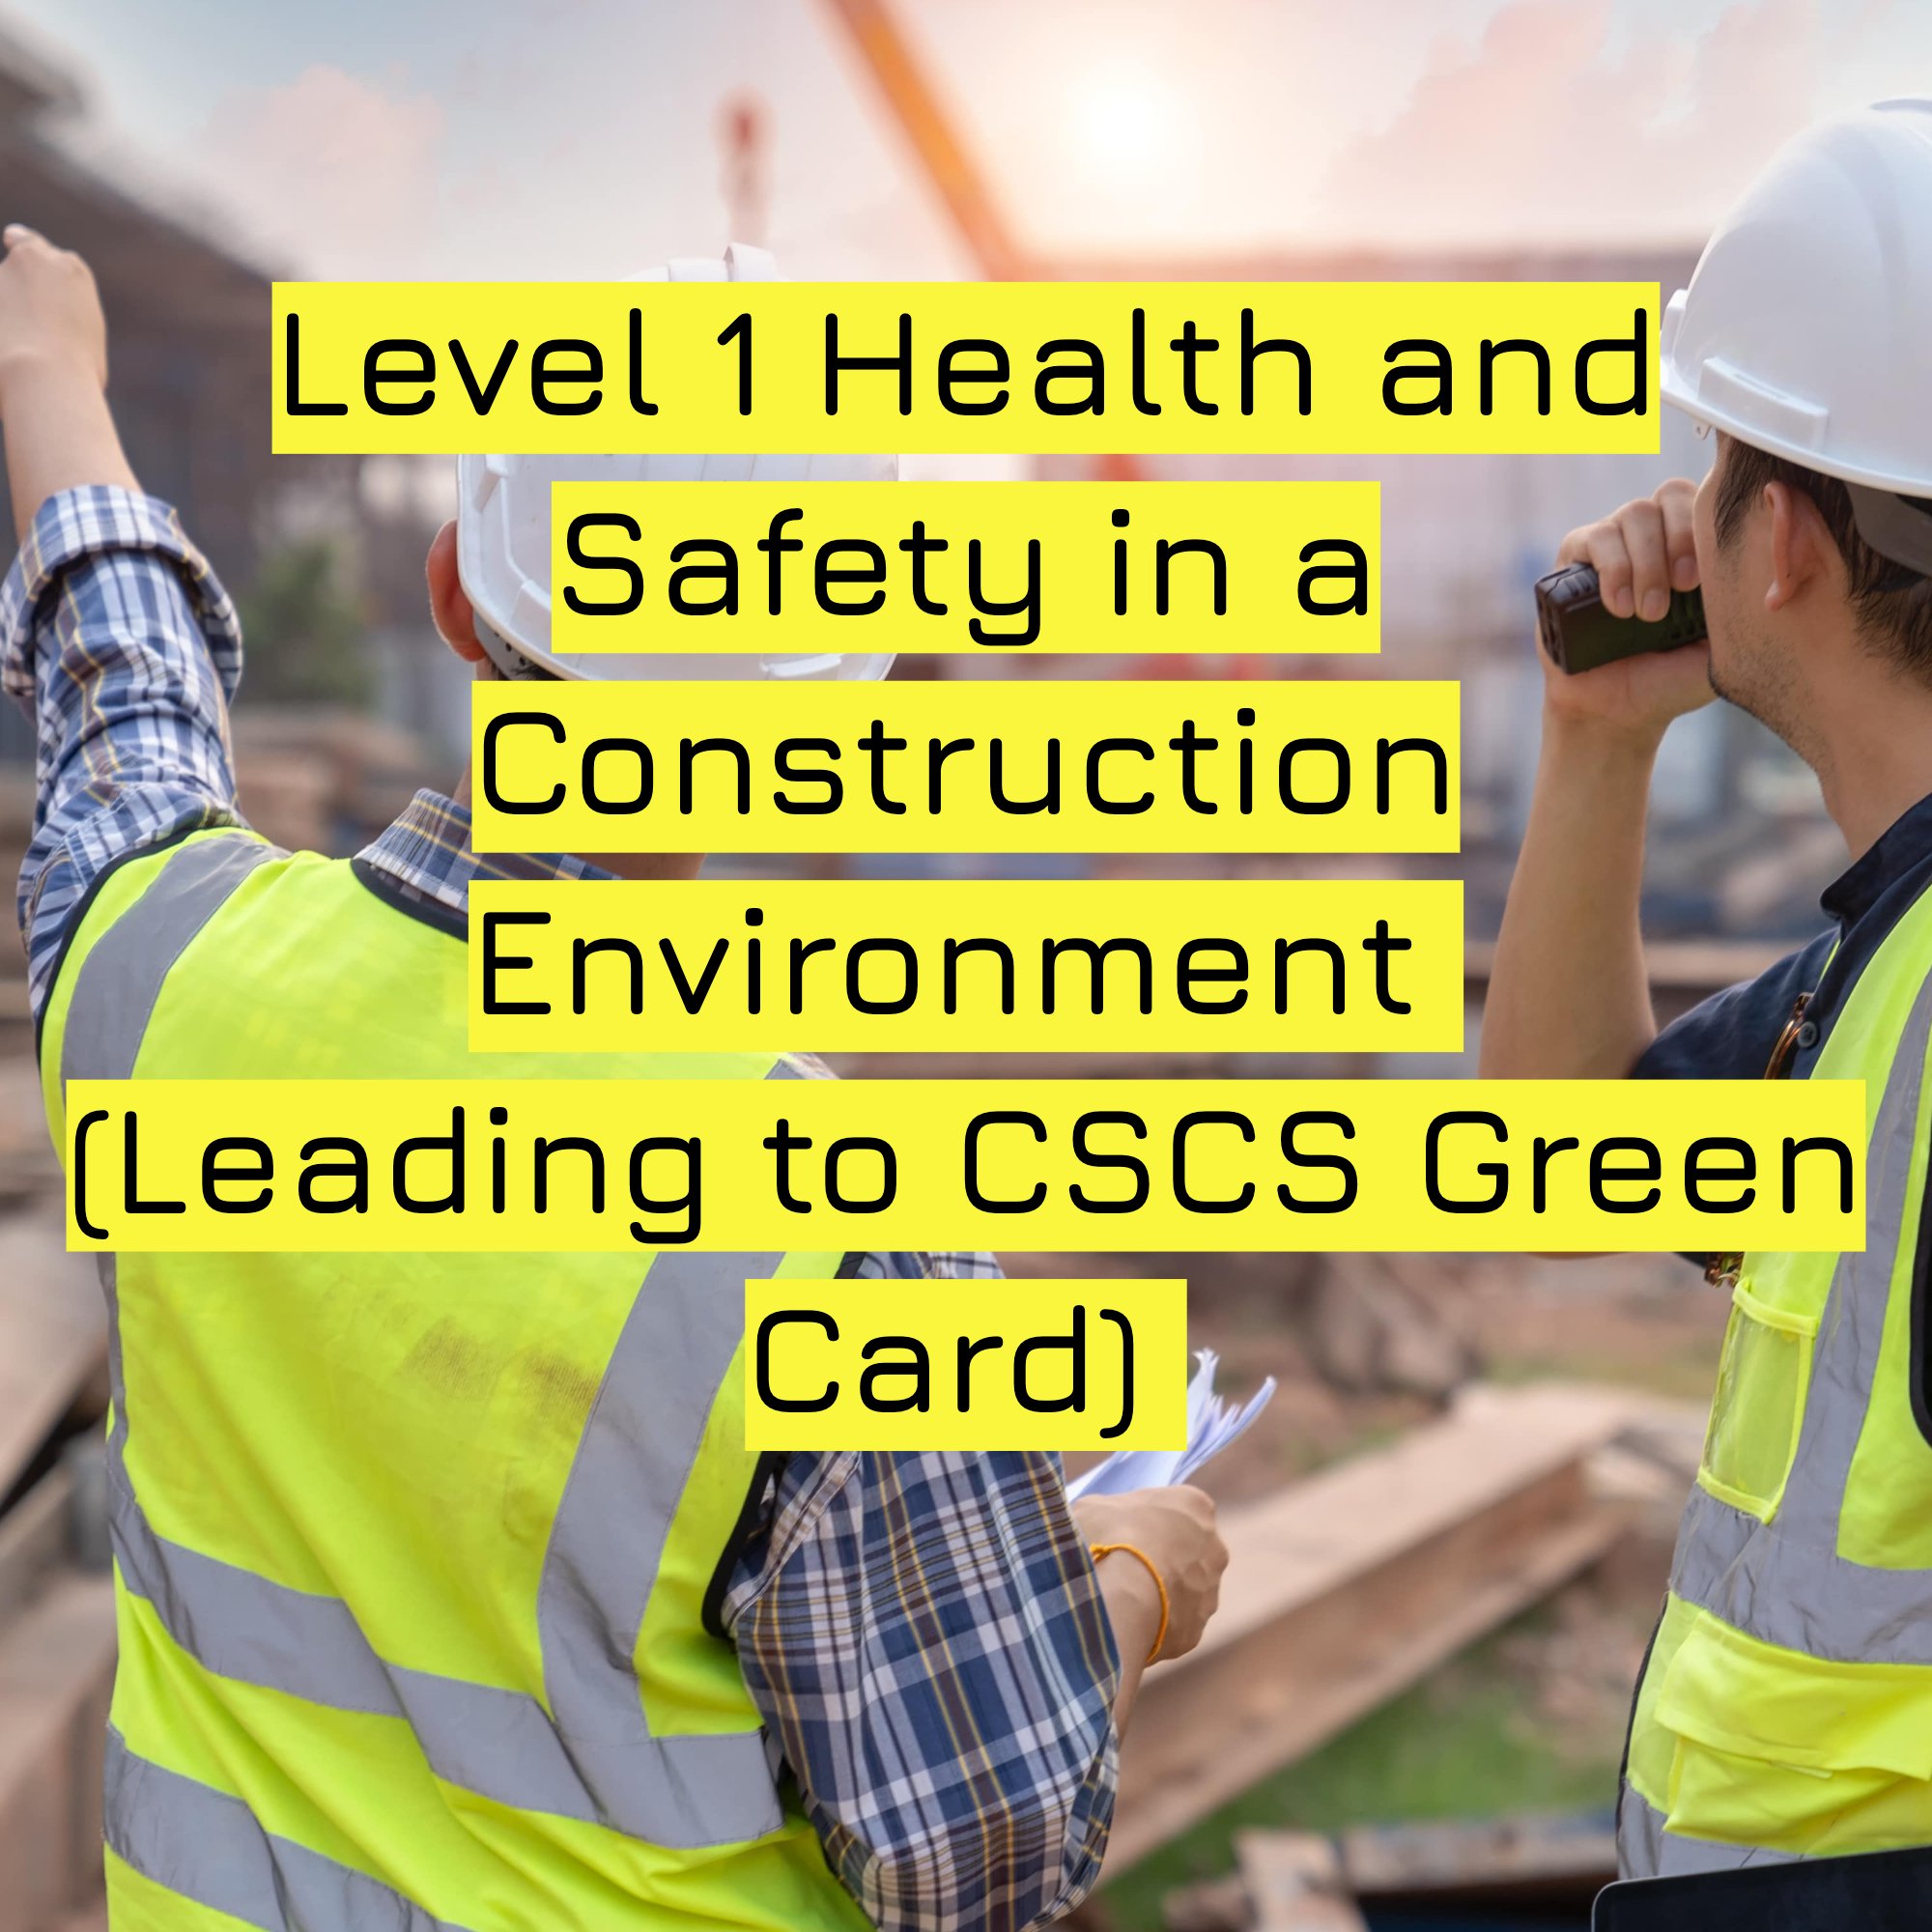 Level 1 Health and Safety in a Construction Environment  (Leading to CSCS Green Card) .jpg